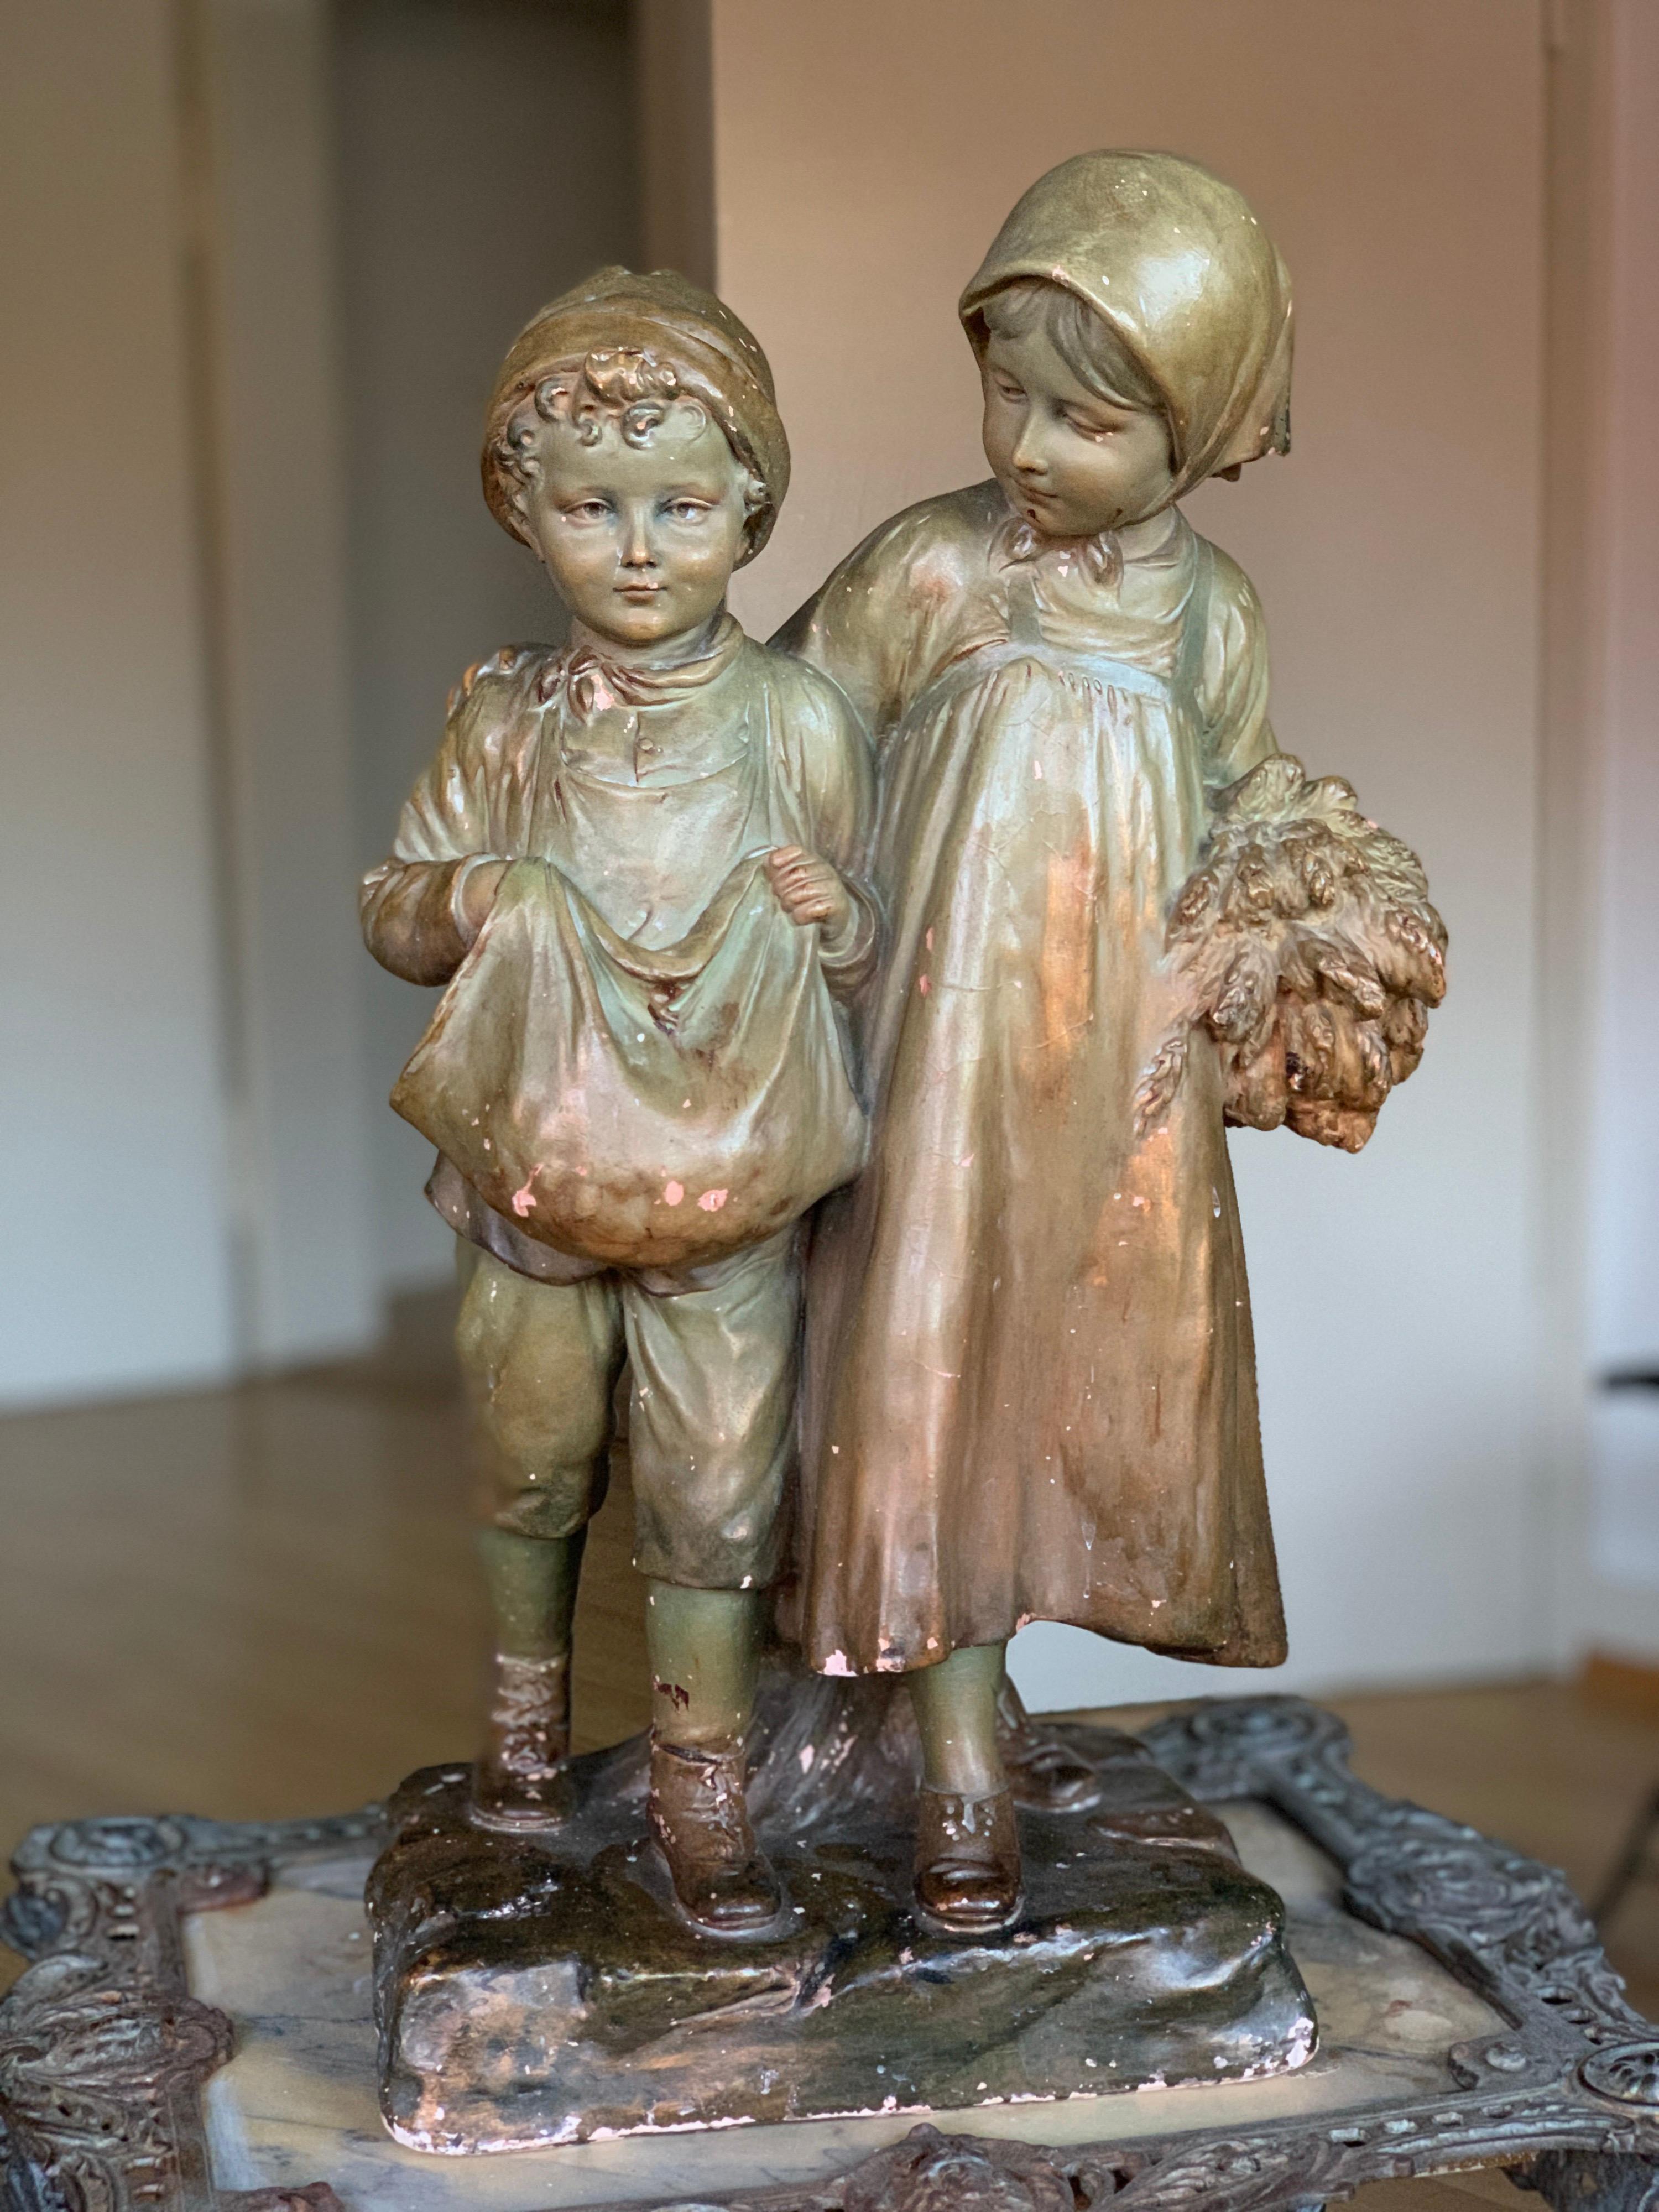 Very fine boy and a girl figure, numbered 620, unrecognised maker. Under expertise valuation, the item is authentic and a museum quality. Underneath is engraved a huge letter P.
F.R.
Probably Dutch children
Origin- France or Austria.
